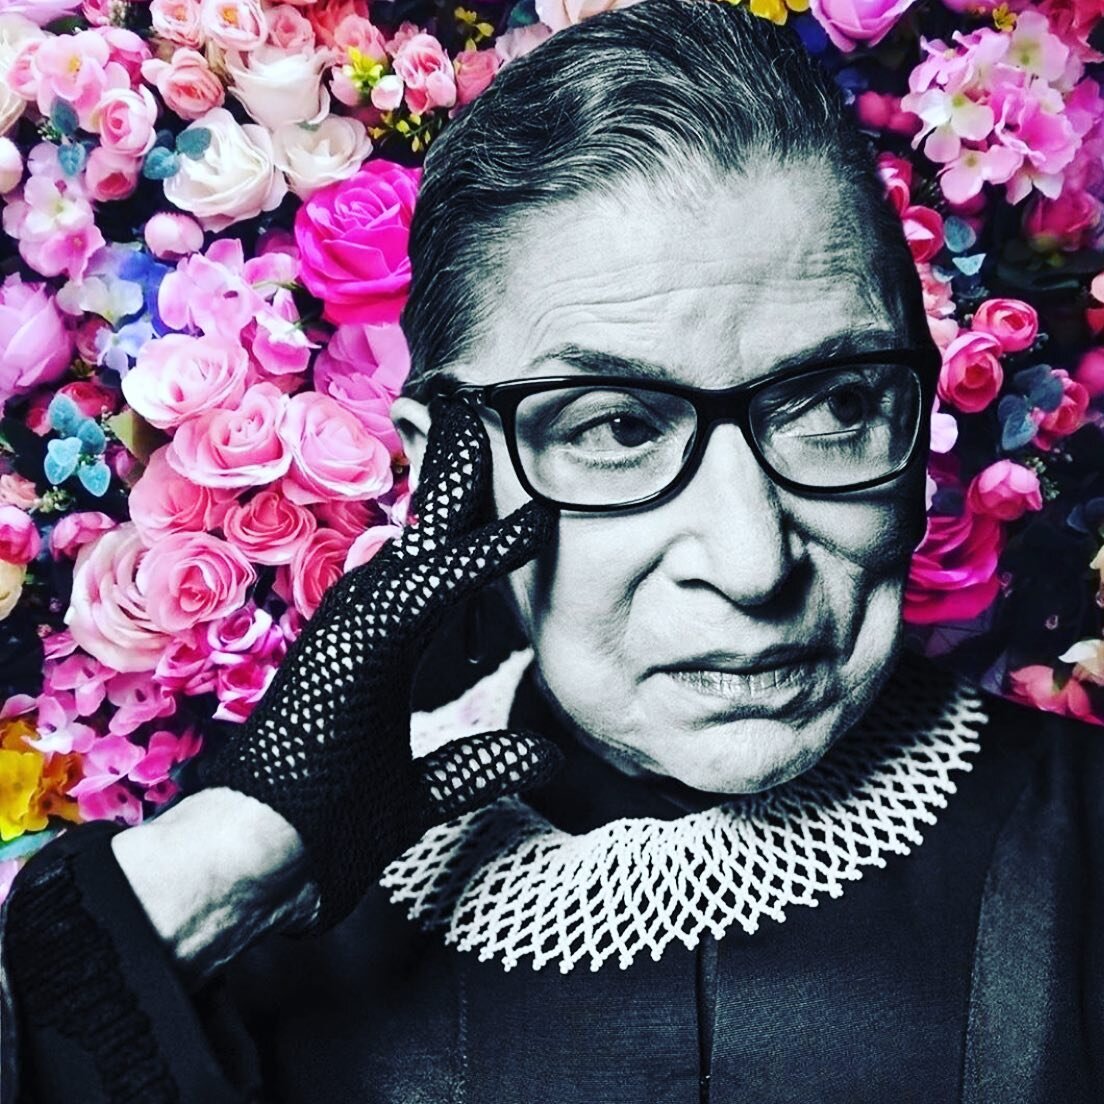 I have to share this post from @studioterrain ! 
Because it matters.
Because She matters 
Because @studioterrain posted this amazing woman just the way I see her!  An incredible icon.... we will miss her greatly!
#mustmakepretty #thisfloweringlife #w